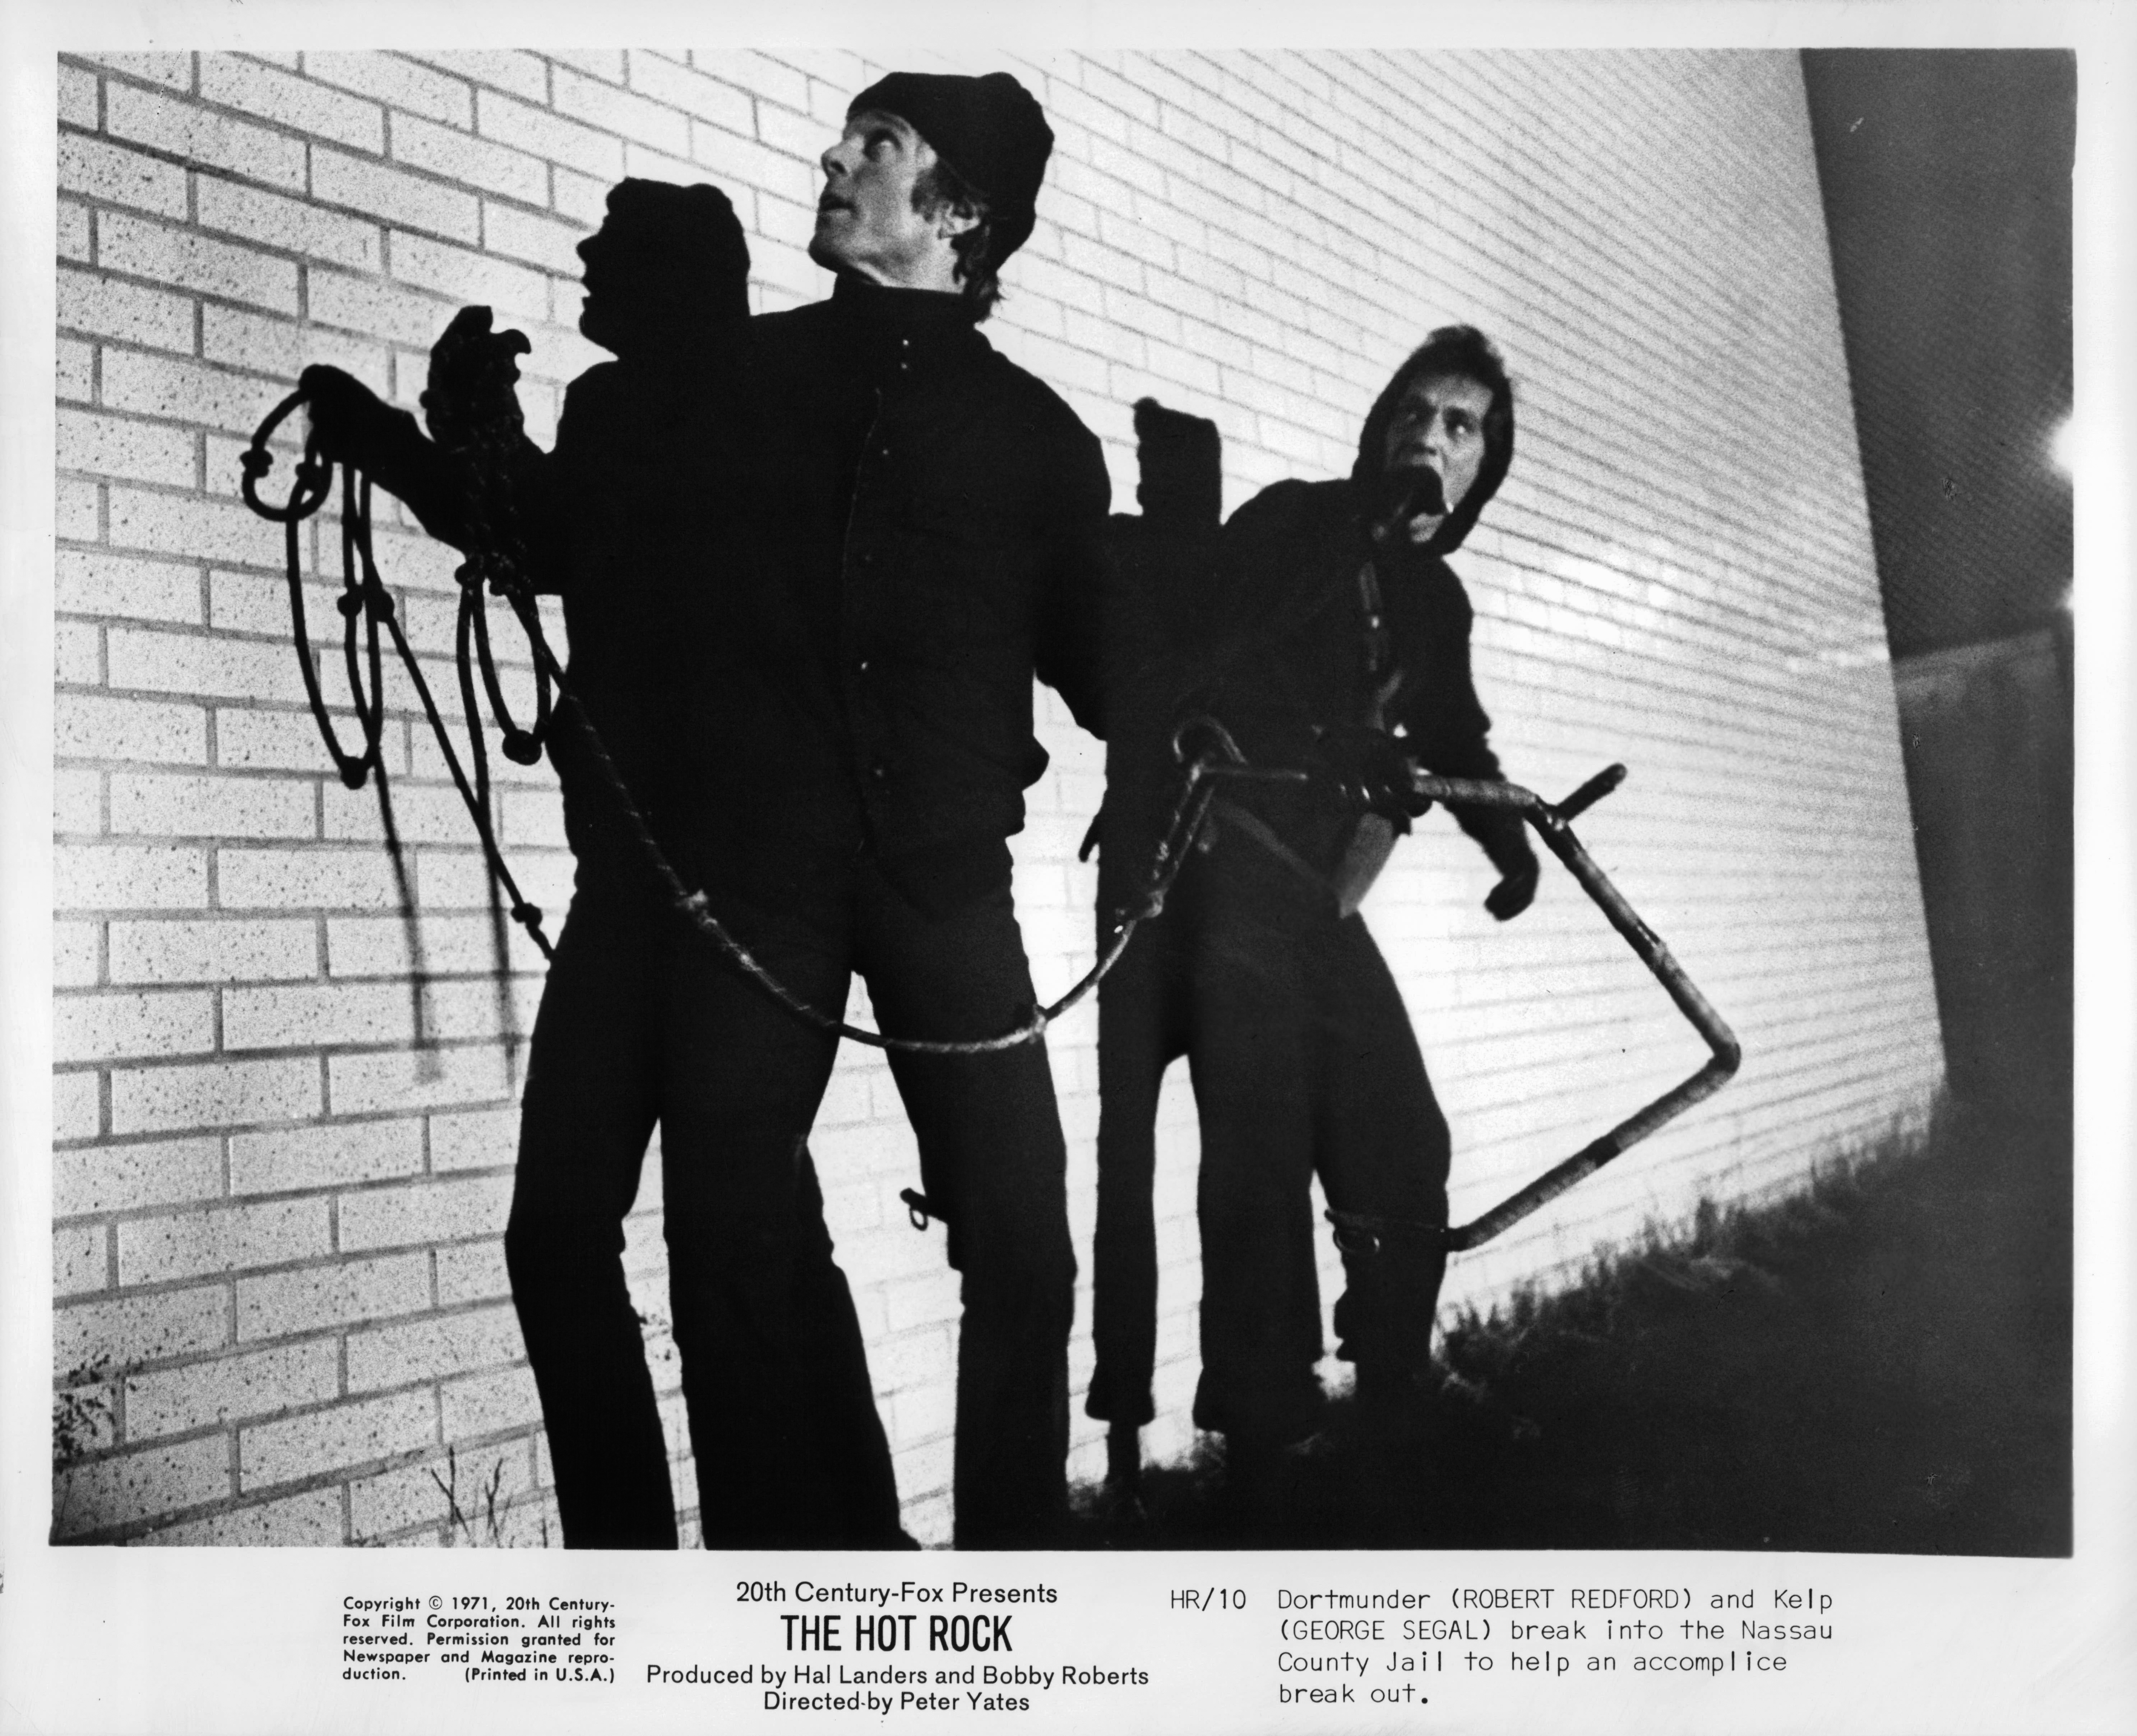 Still of Robert Redford, George Segal and Moses Gunn in The Hot Rock (1972)